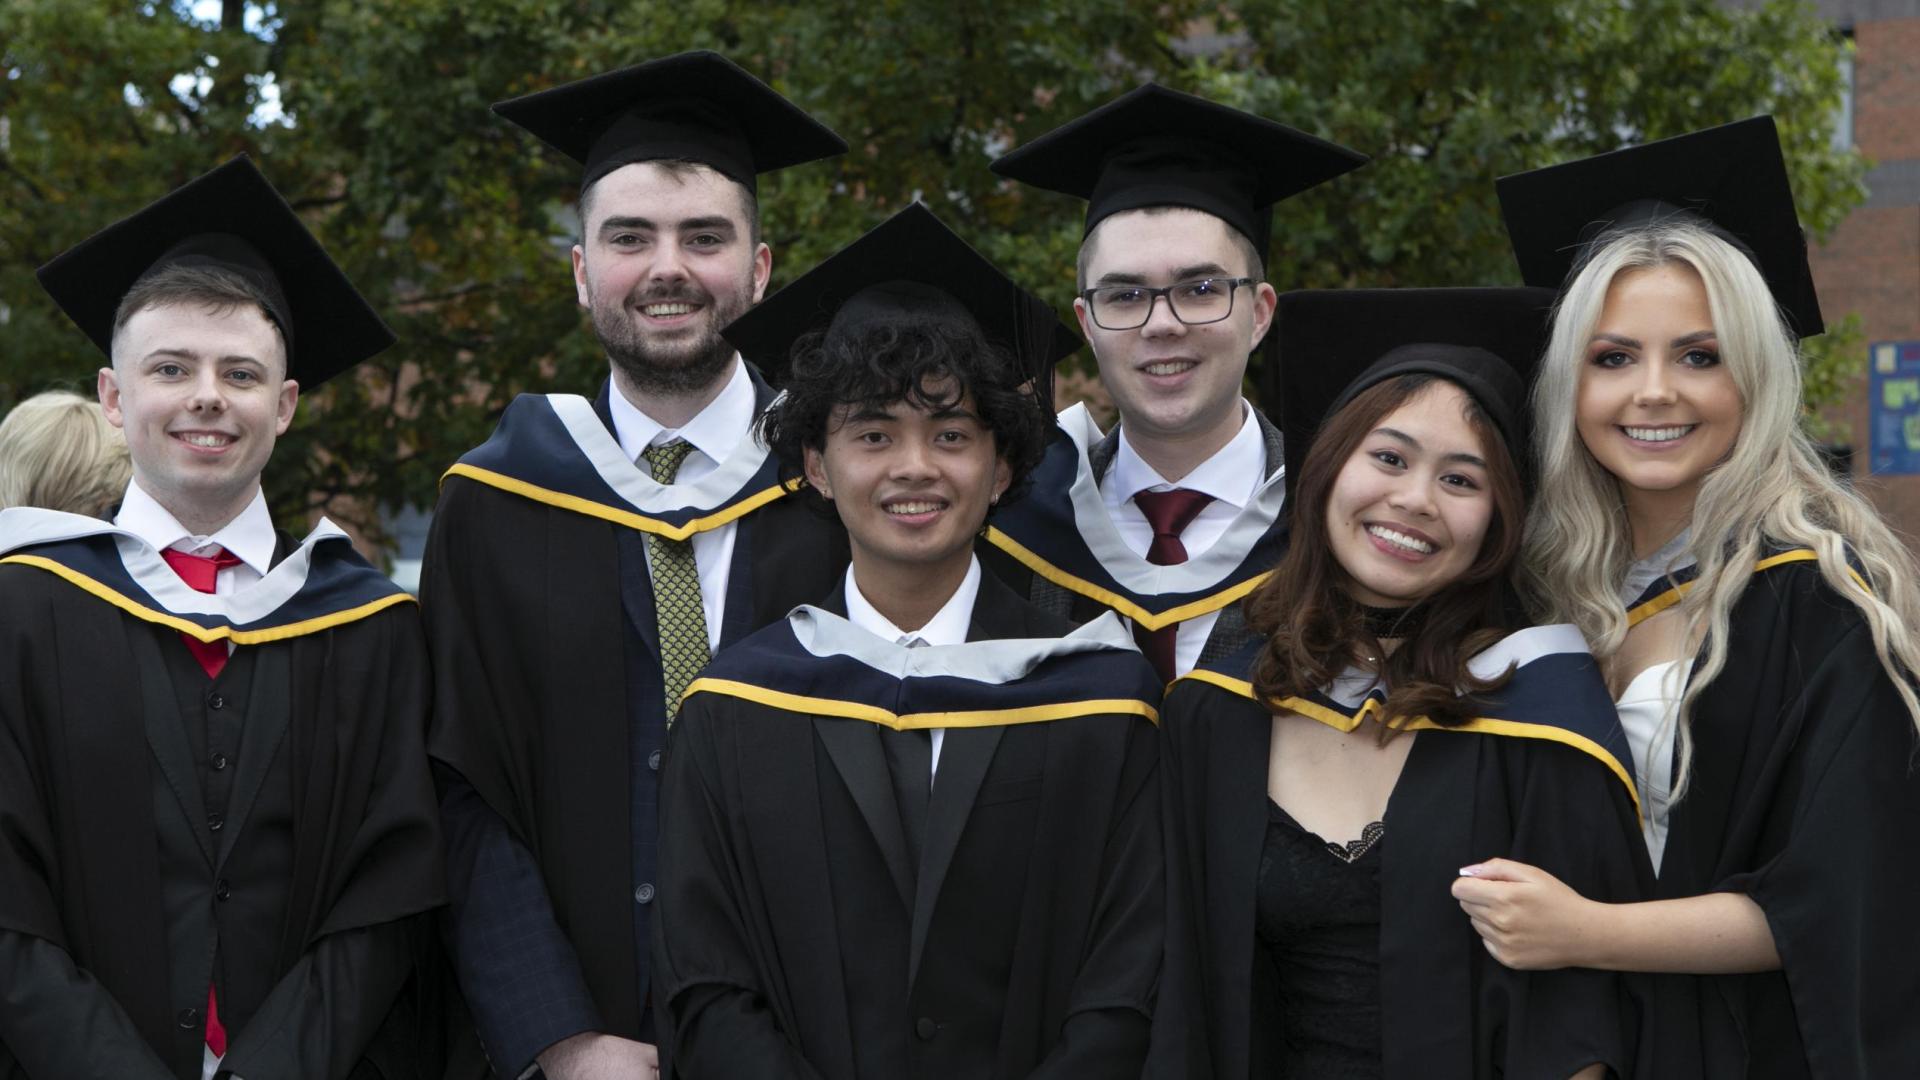 Group of students in Graduation robes